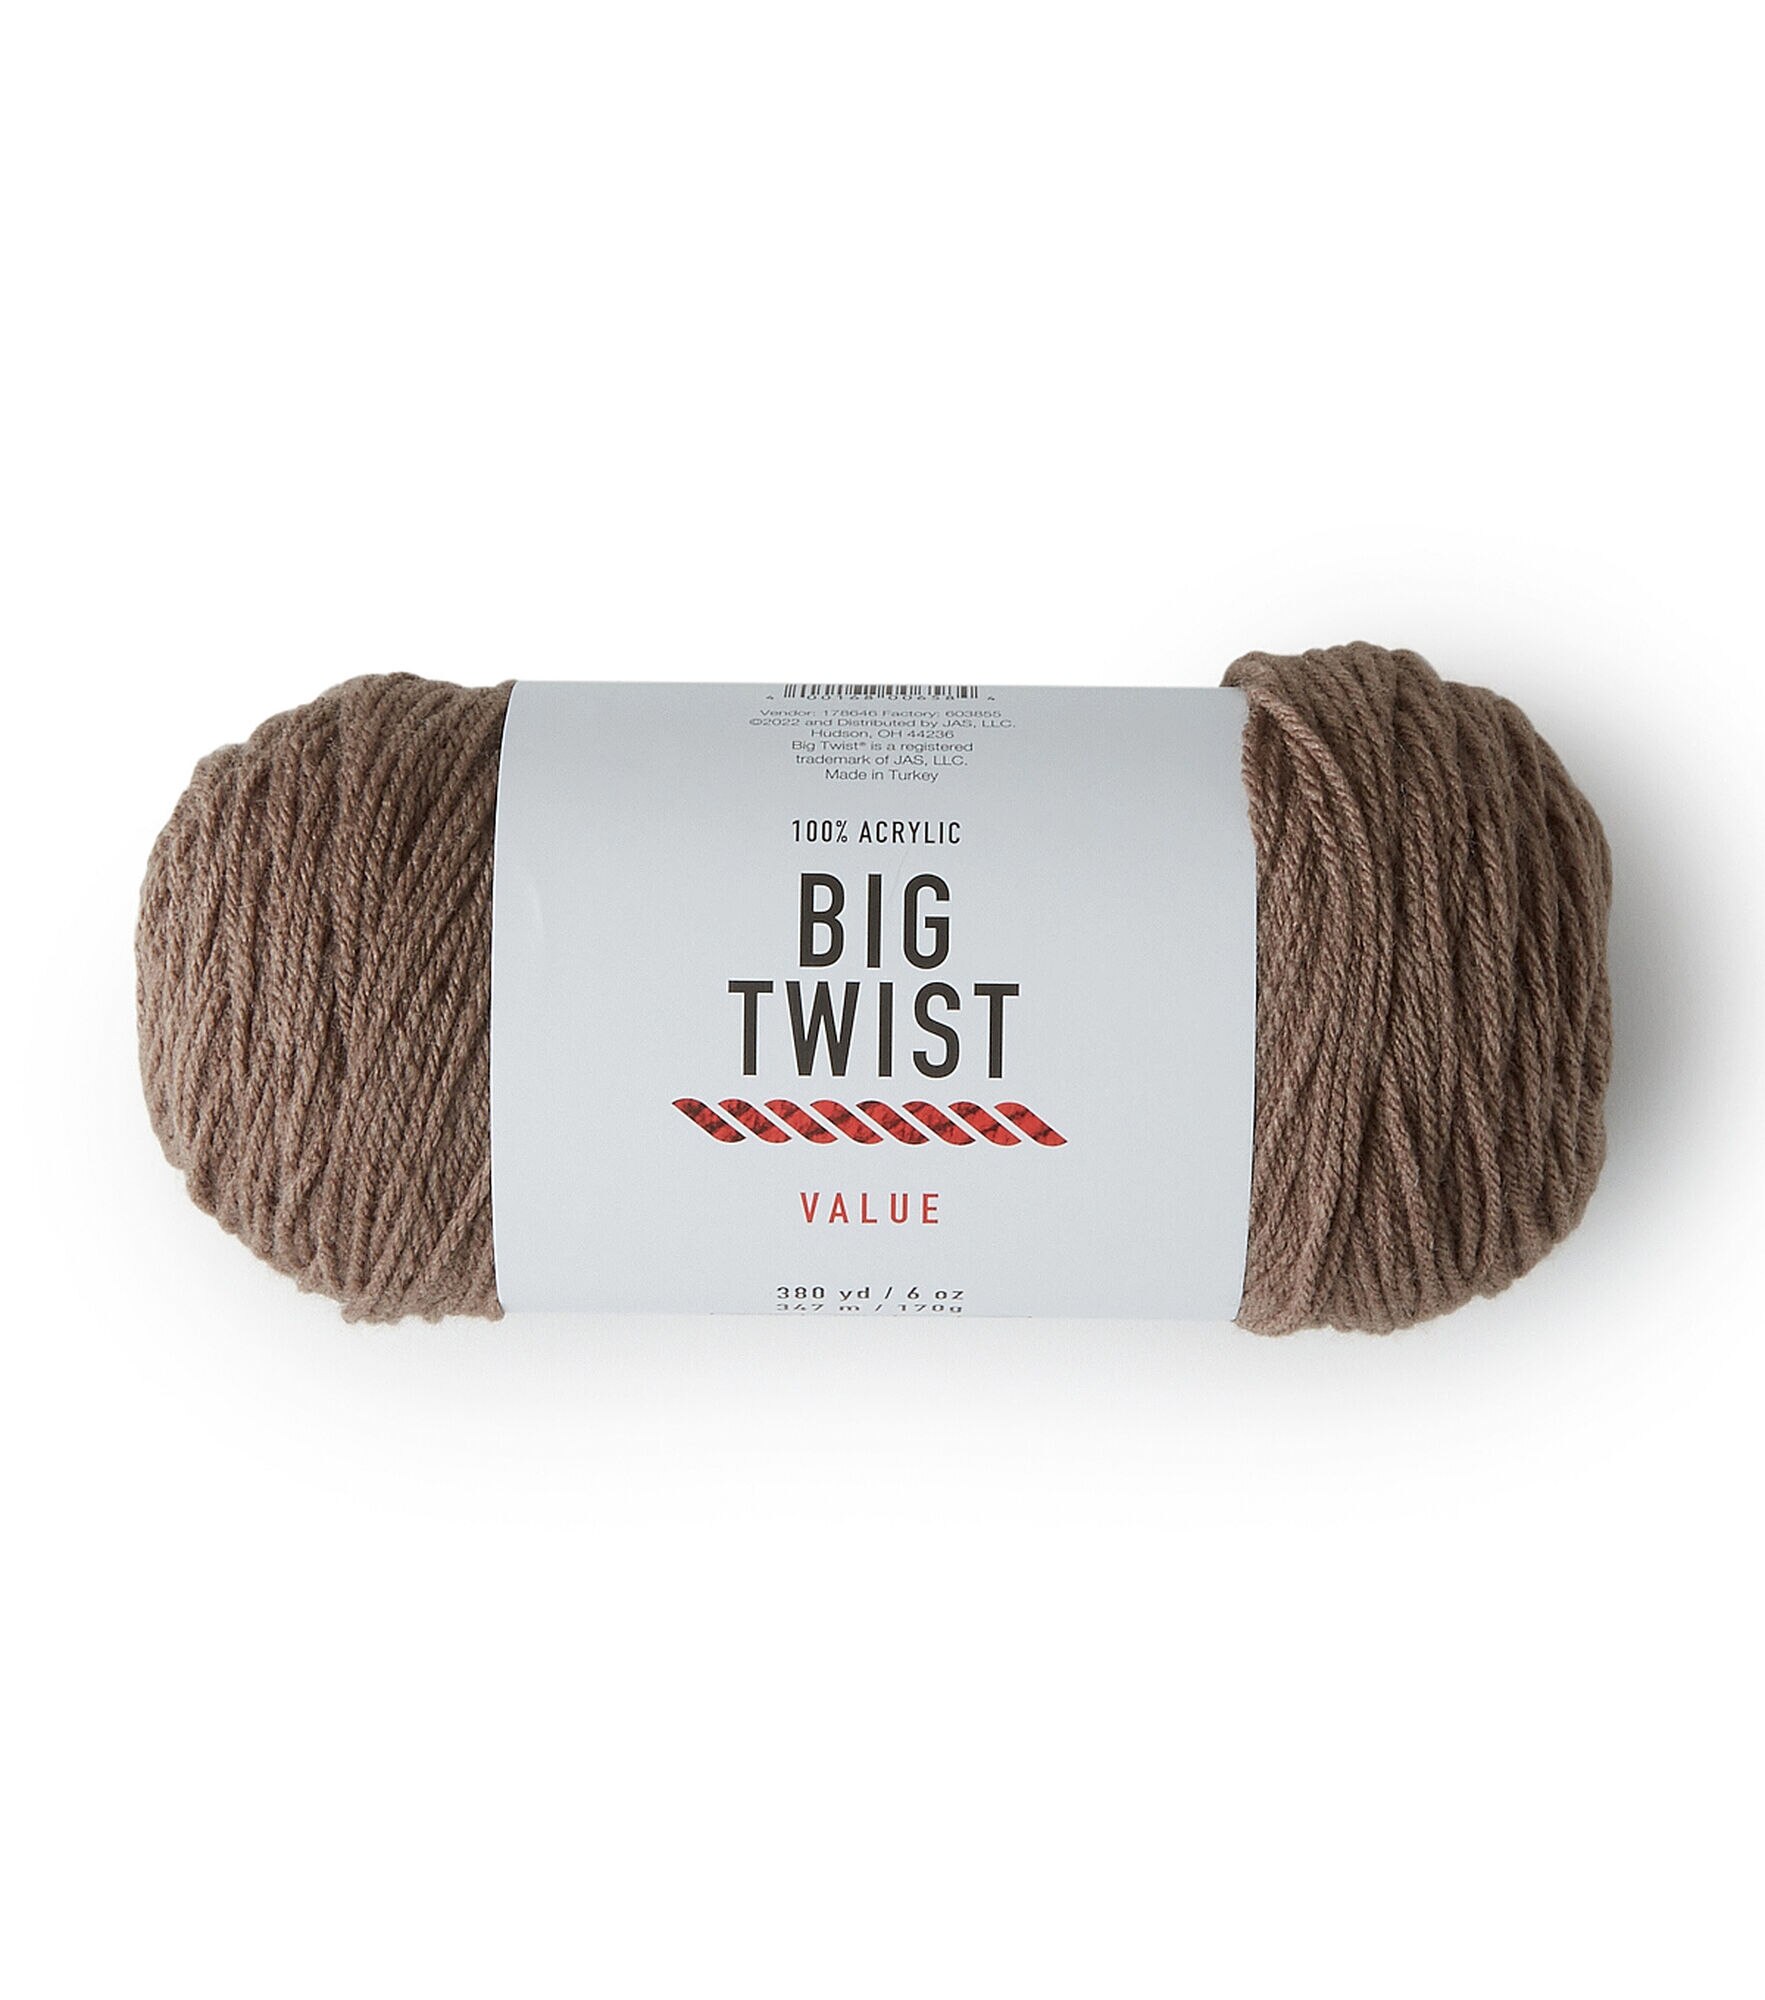 Solid Worsted Acrylic 380yd Value Yarn by Big Twist, Taupe, hi-res